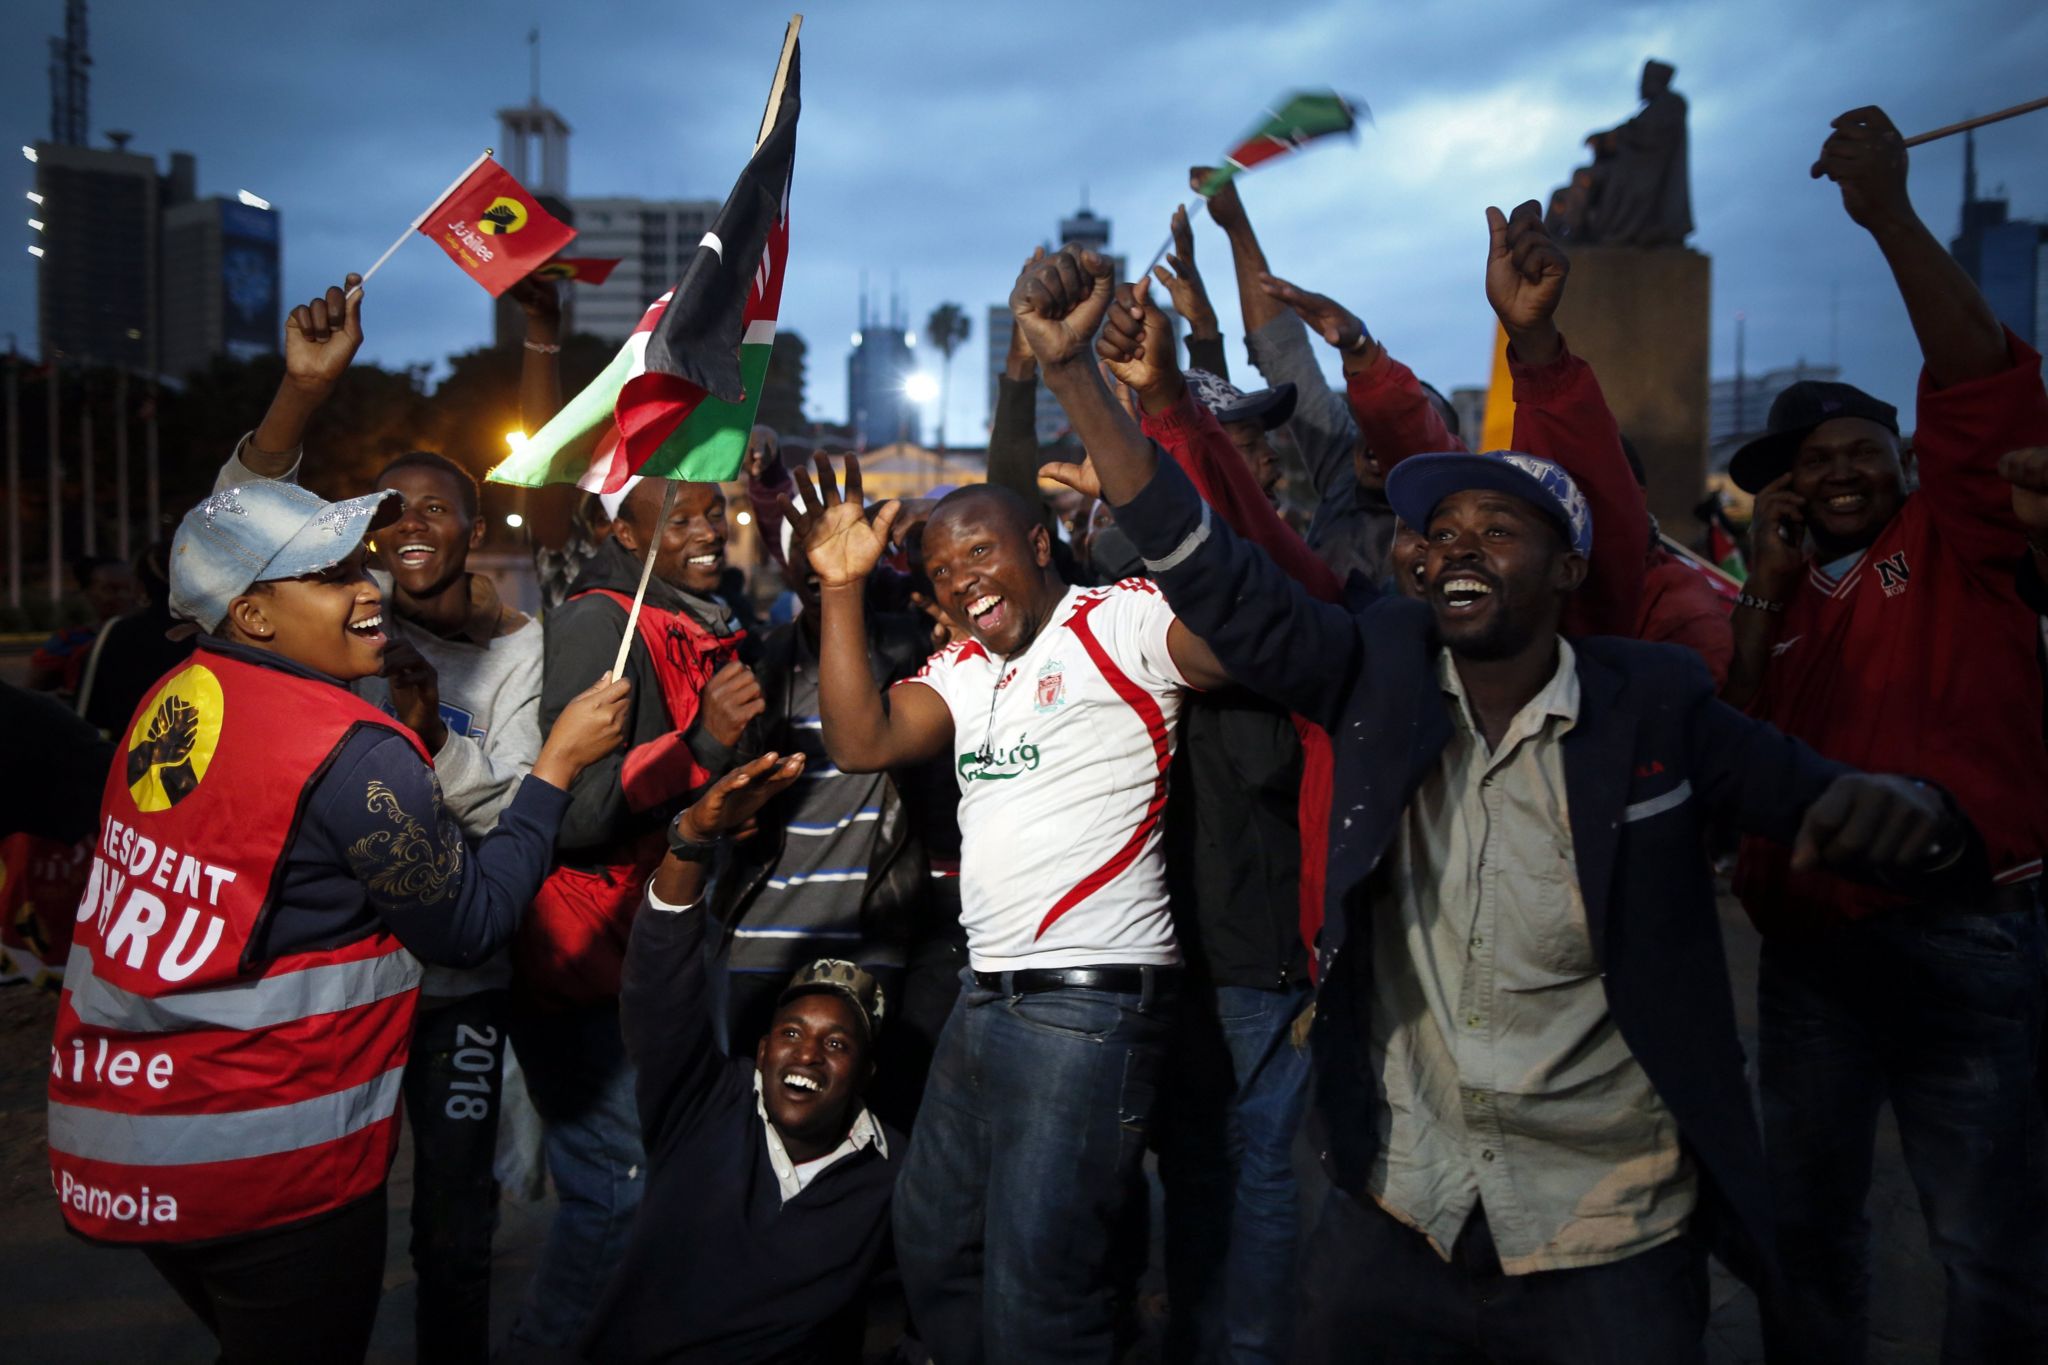 upporters of the incumbent President and the leader of the ruling Jubilee coalition Uhuru Kenyatta cheer as they wait for the electoral body to announce Kenyatta"s victory, in downtown Nairobi, Kenya, 11 August 2017. The electoral body Independent Electoral and Boundaries Commission (IEBC) is expected to announce the winner of the presidential poll soon where Kenyatta will beat opposition Raila Odinga by a big margin.